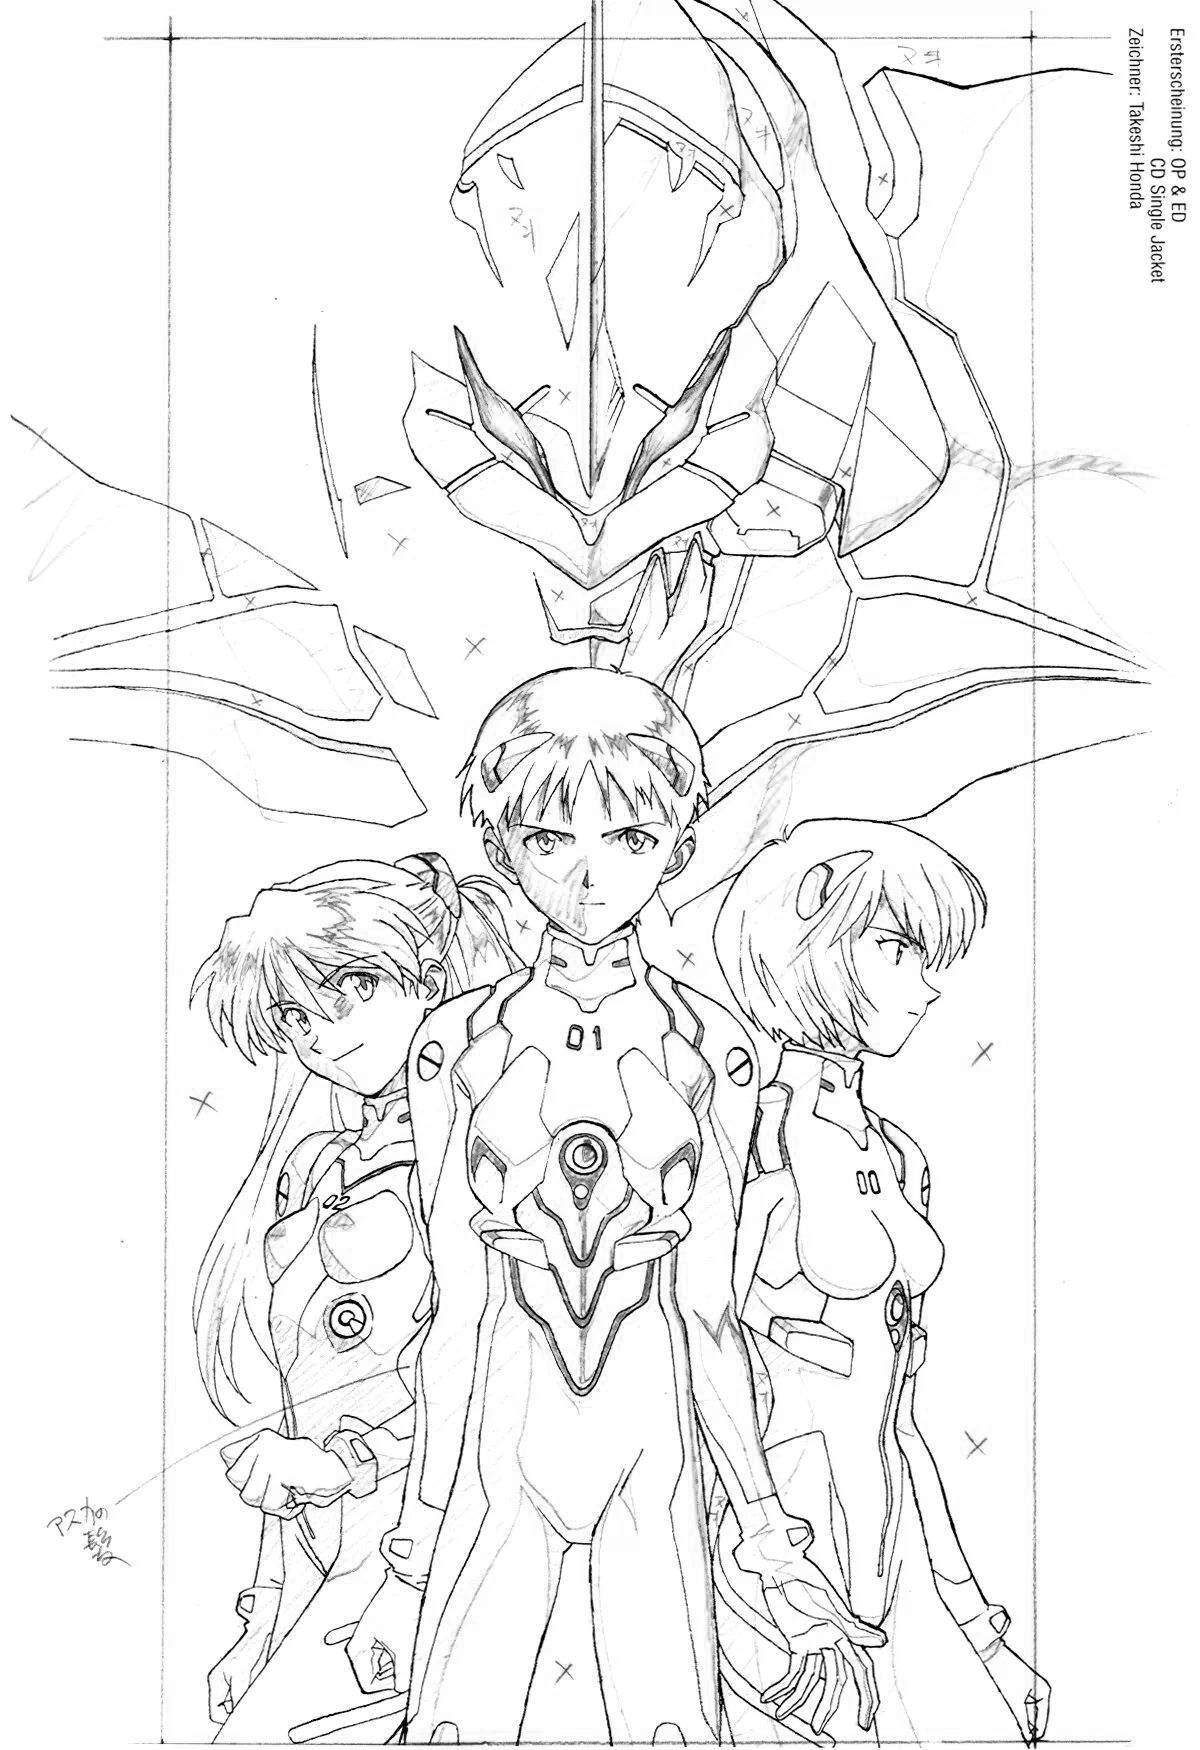 Dramatic evangelion ray coloring book